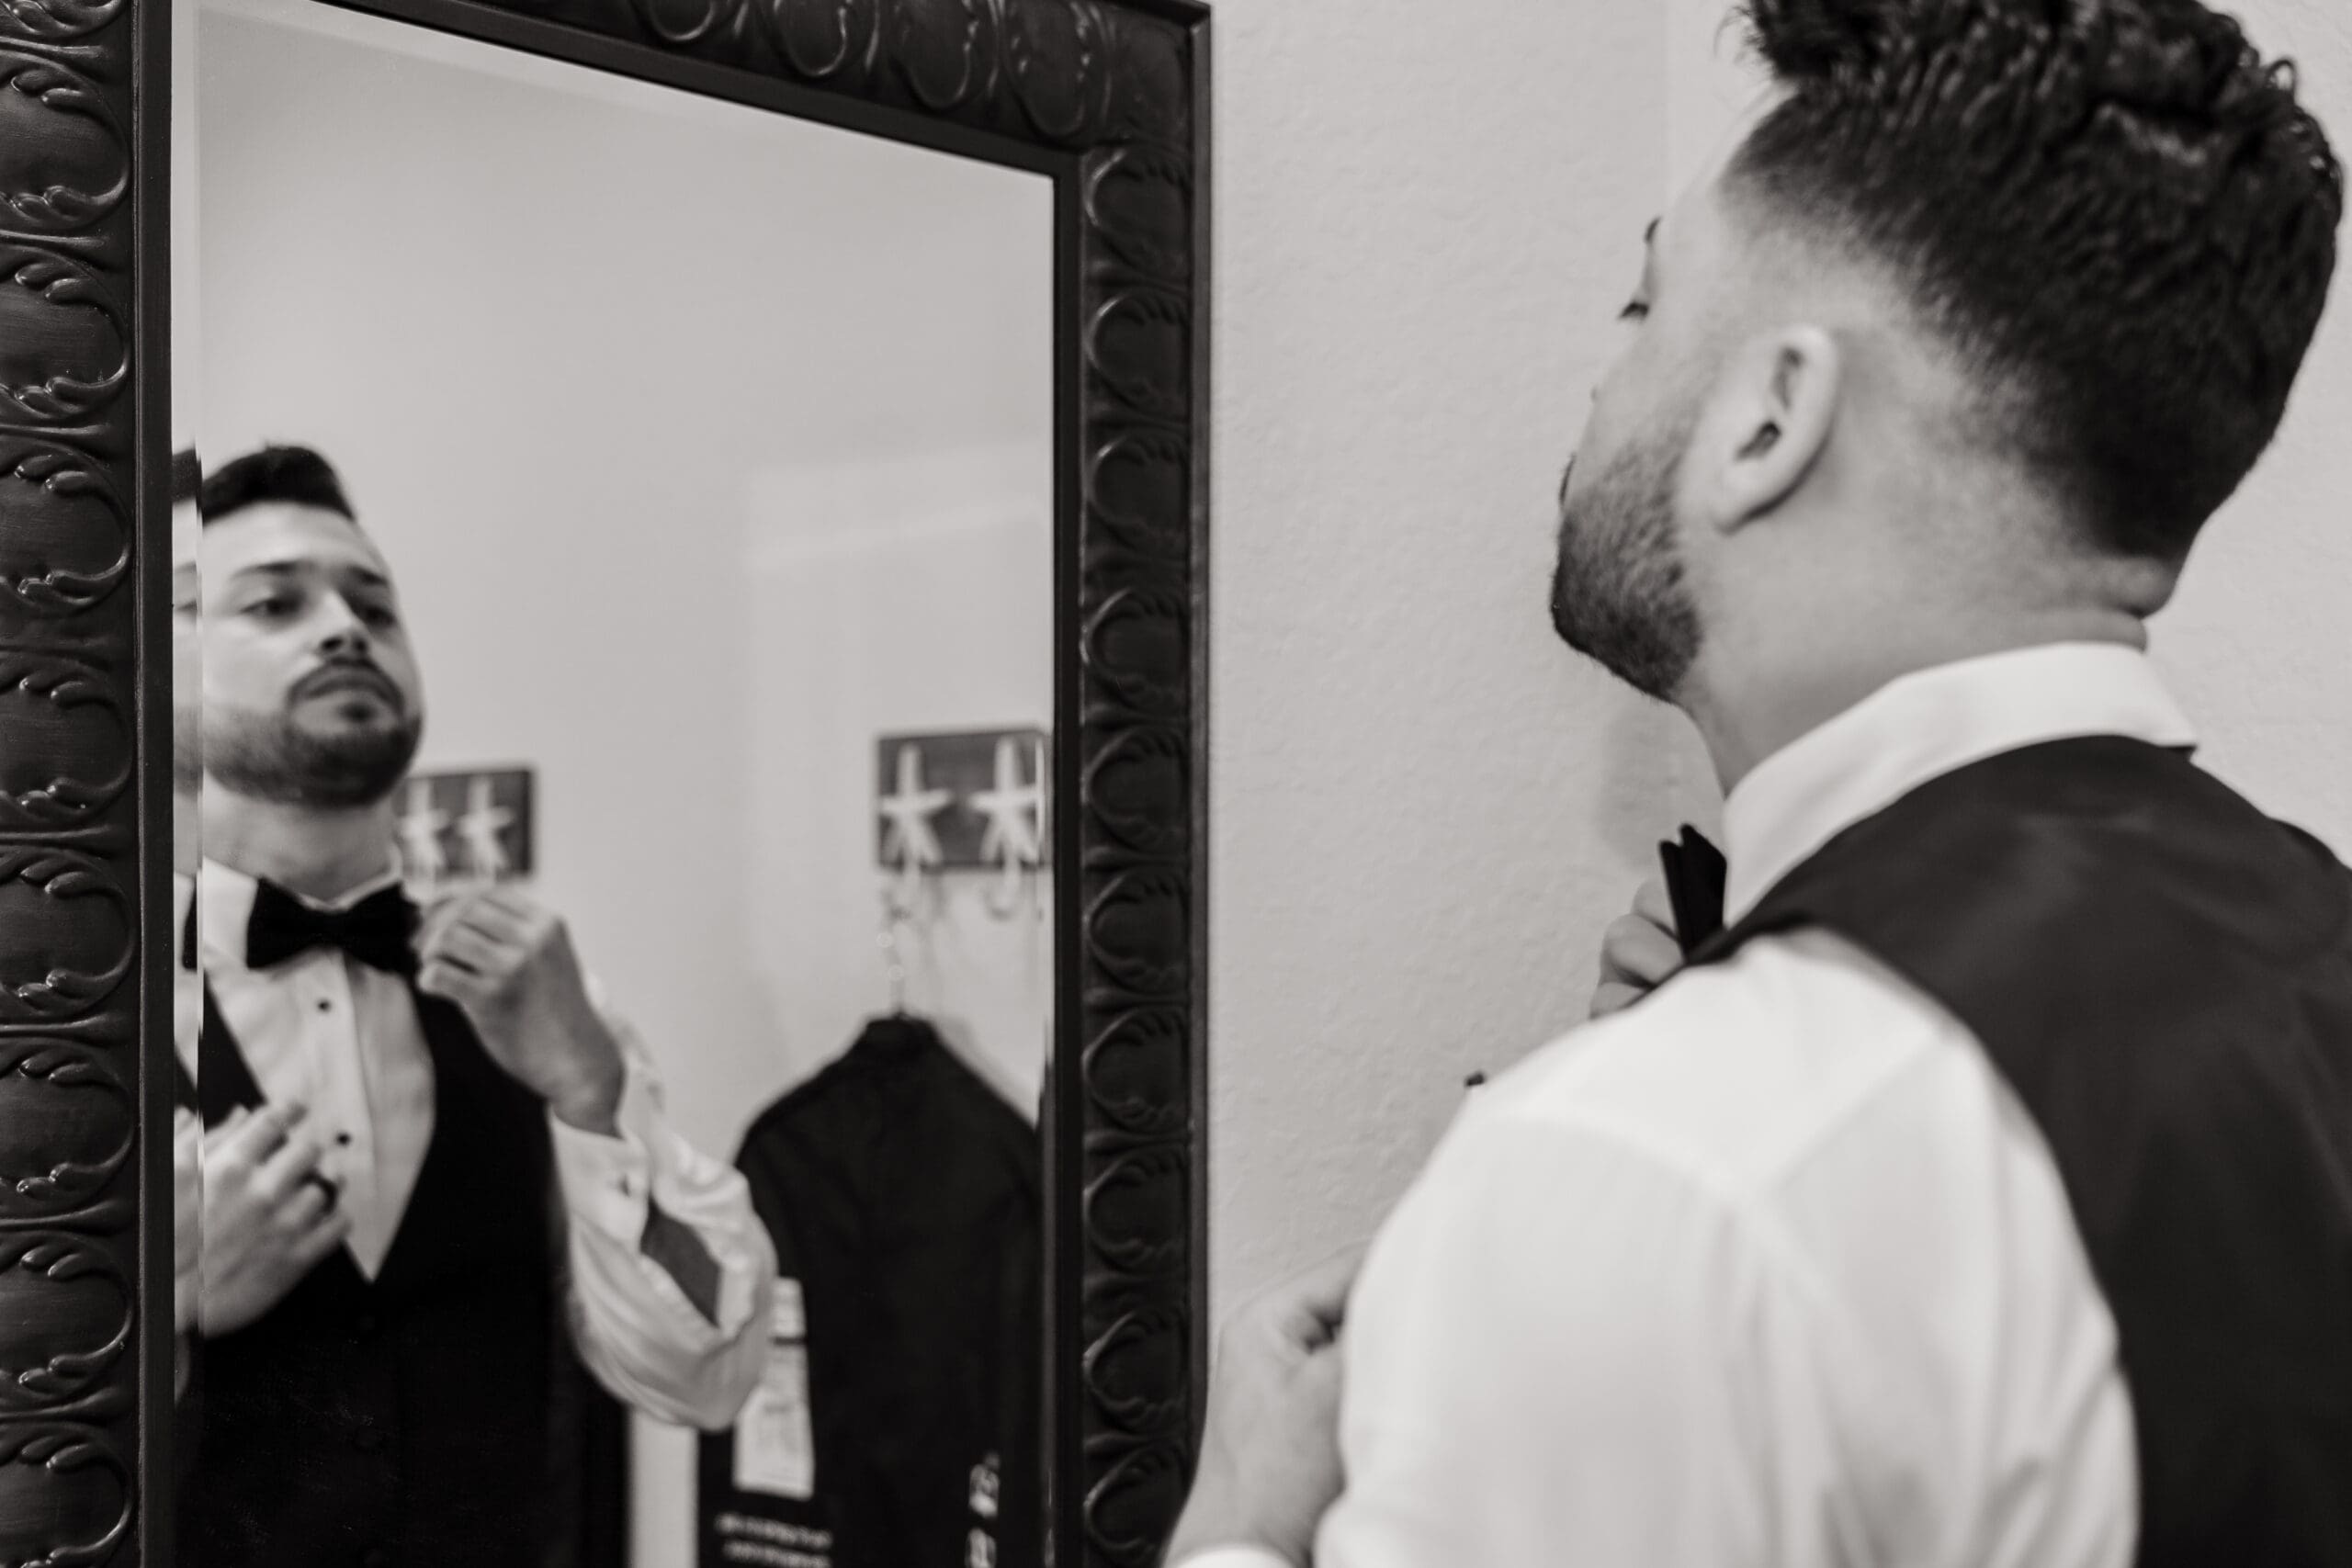 Jazer adjusting his tie in the mirror in black and white